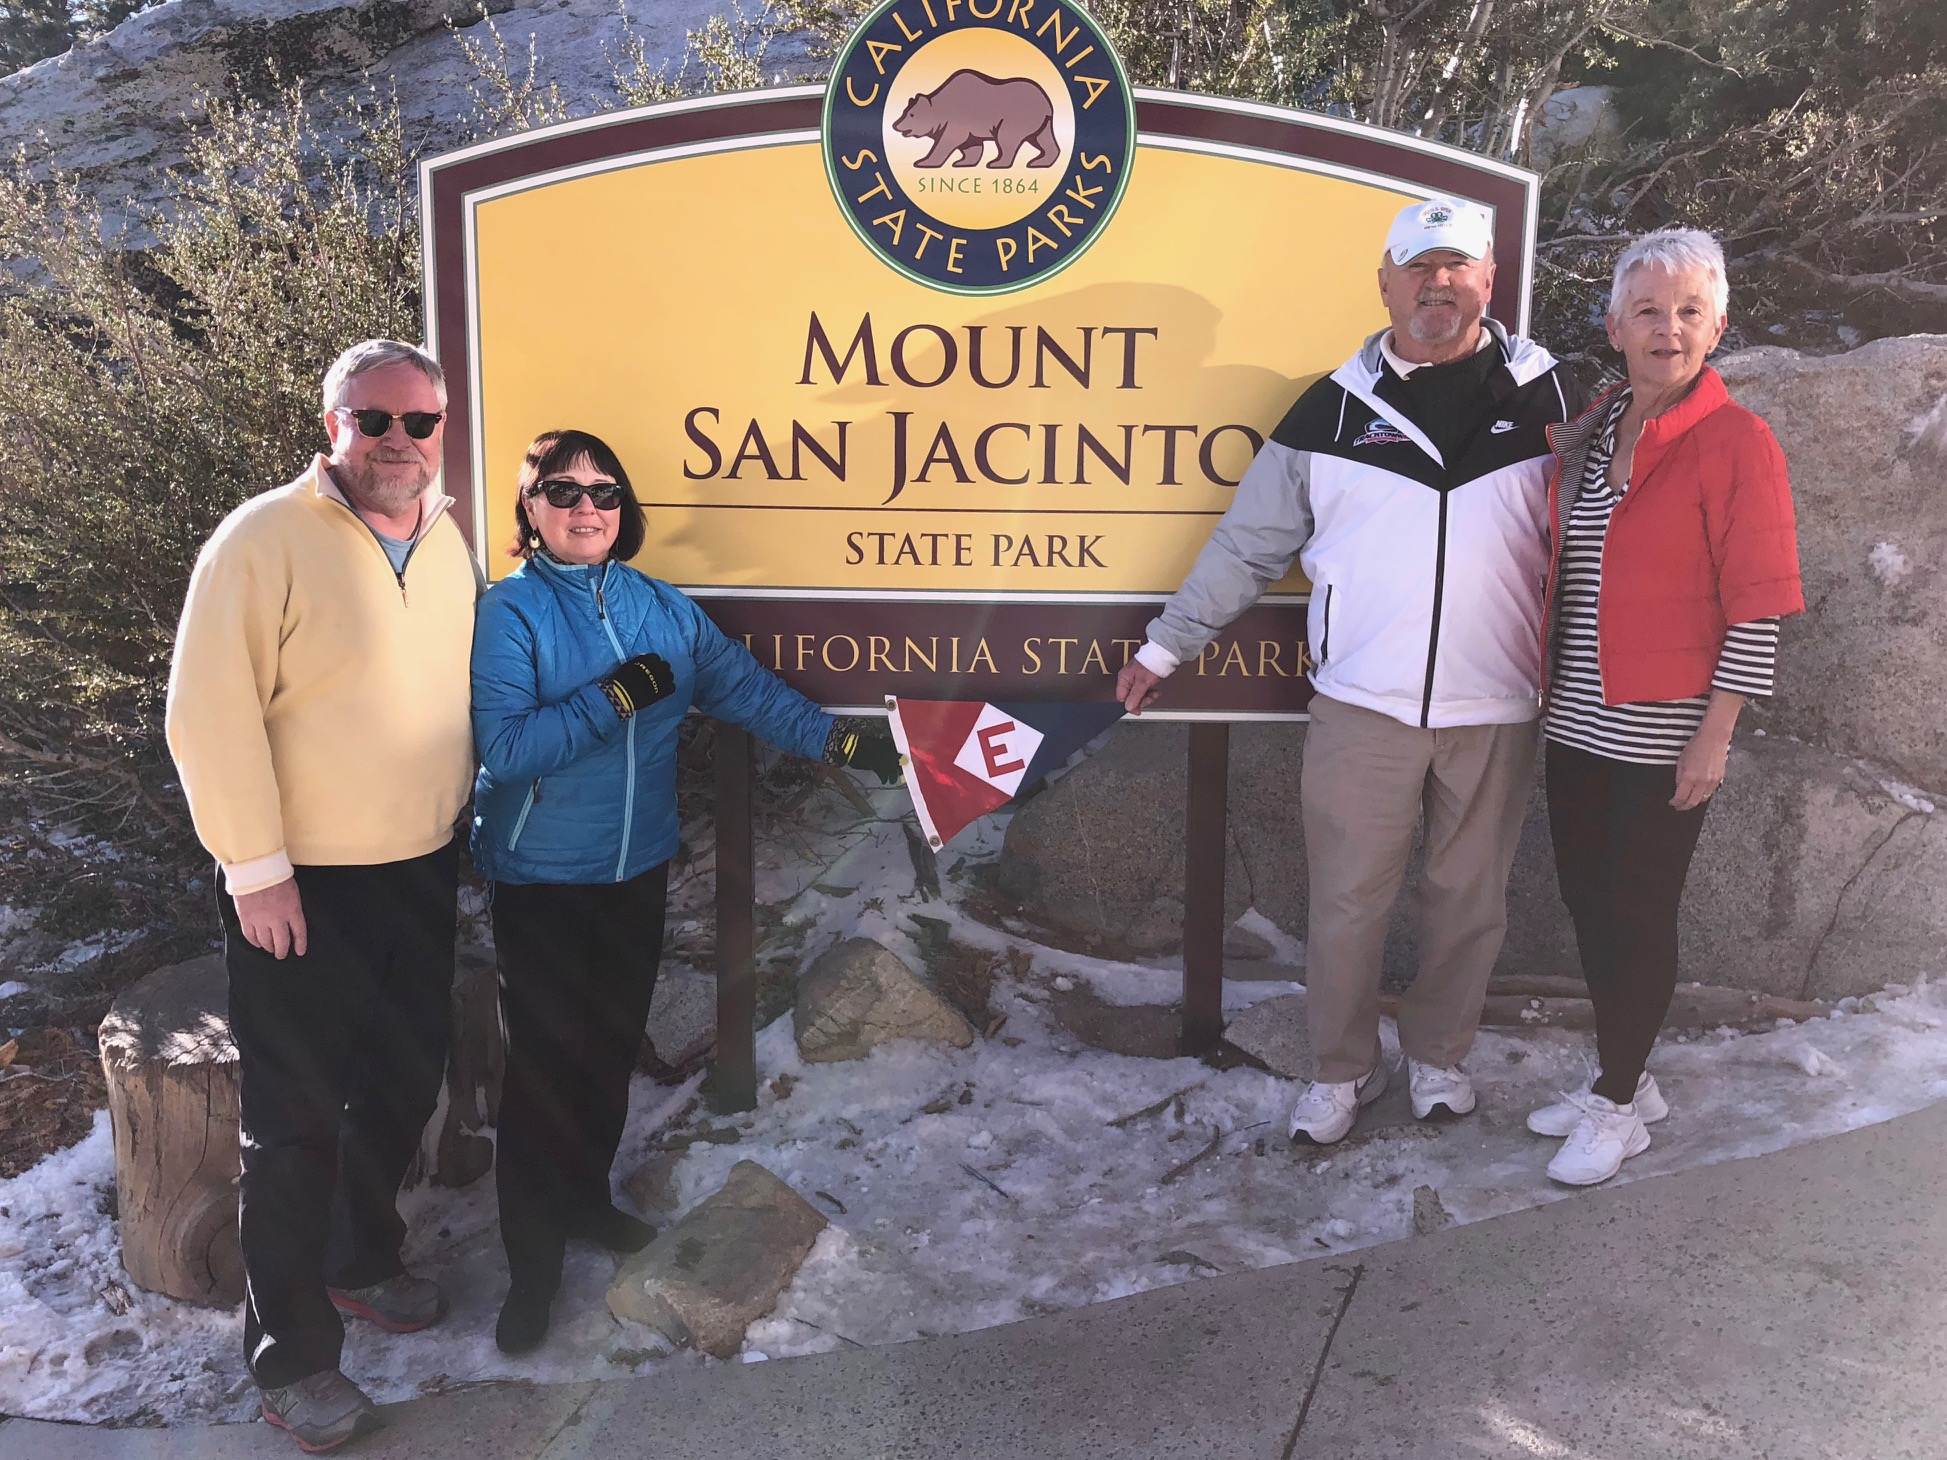  Richard &amp; Marie and Rex &amp; Bonnie show their colors at the top of Mount San Jacinto, California 